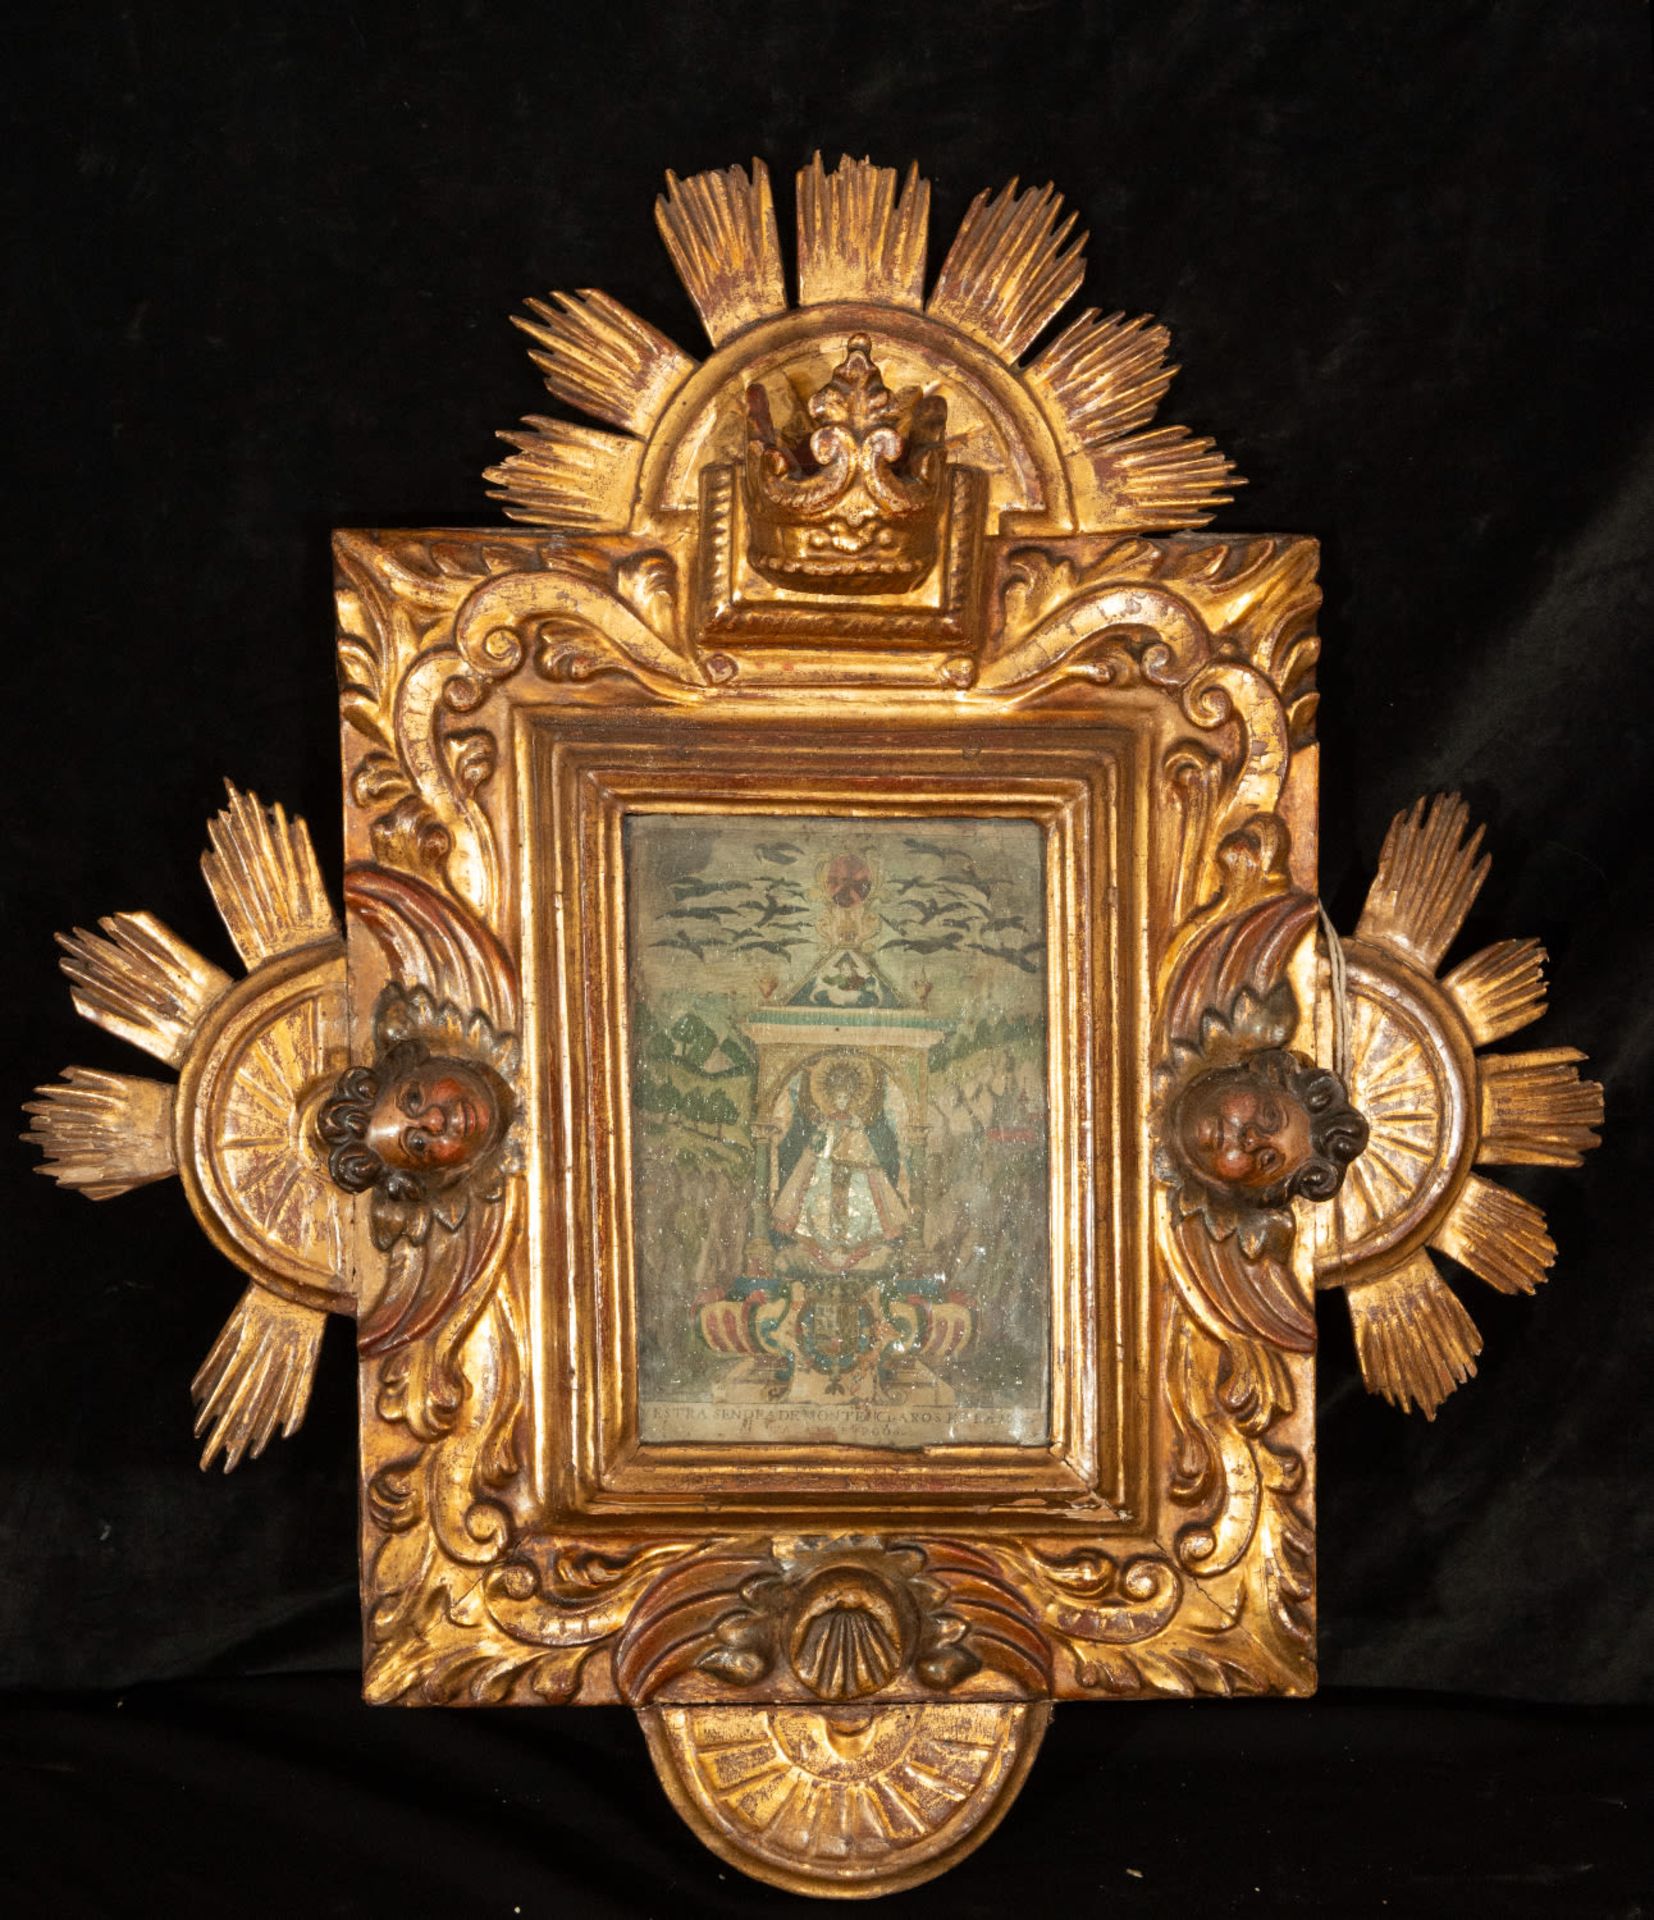 Cornucopia frame from the 17th century in polychrome and gilded wood relief with gold leaf